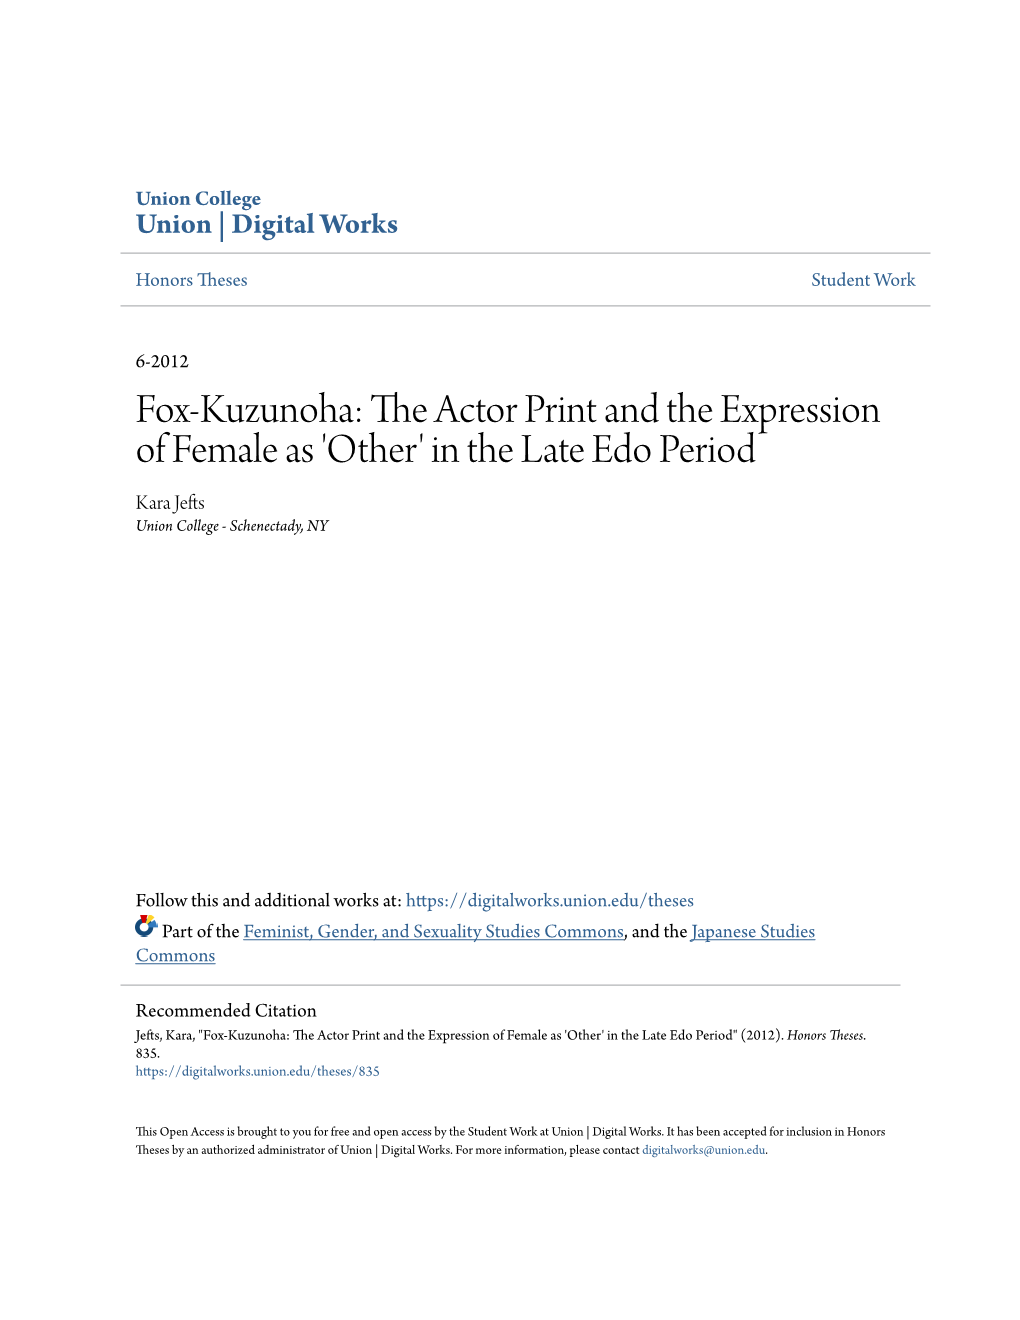 Fox-Kuzunoha: the Actor Print and the Expression of Female As 'Other' in the Late Edo Period Kara Jefts Union College - Schenectady, NY